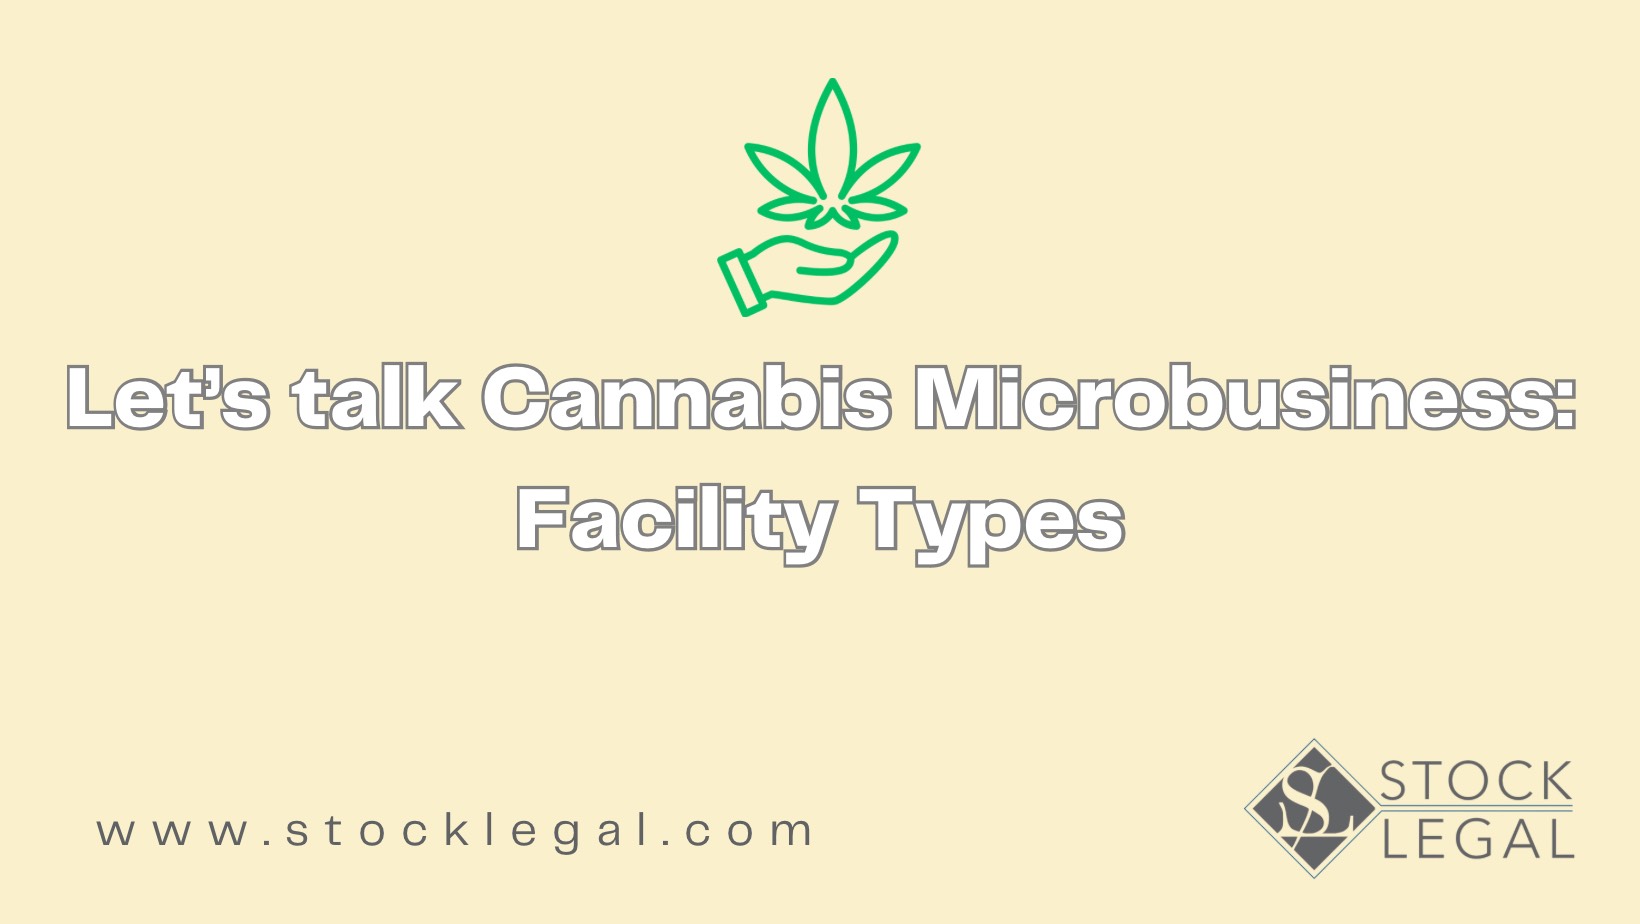 The Microbusiness Cannabis Facility Types